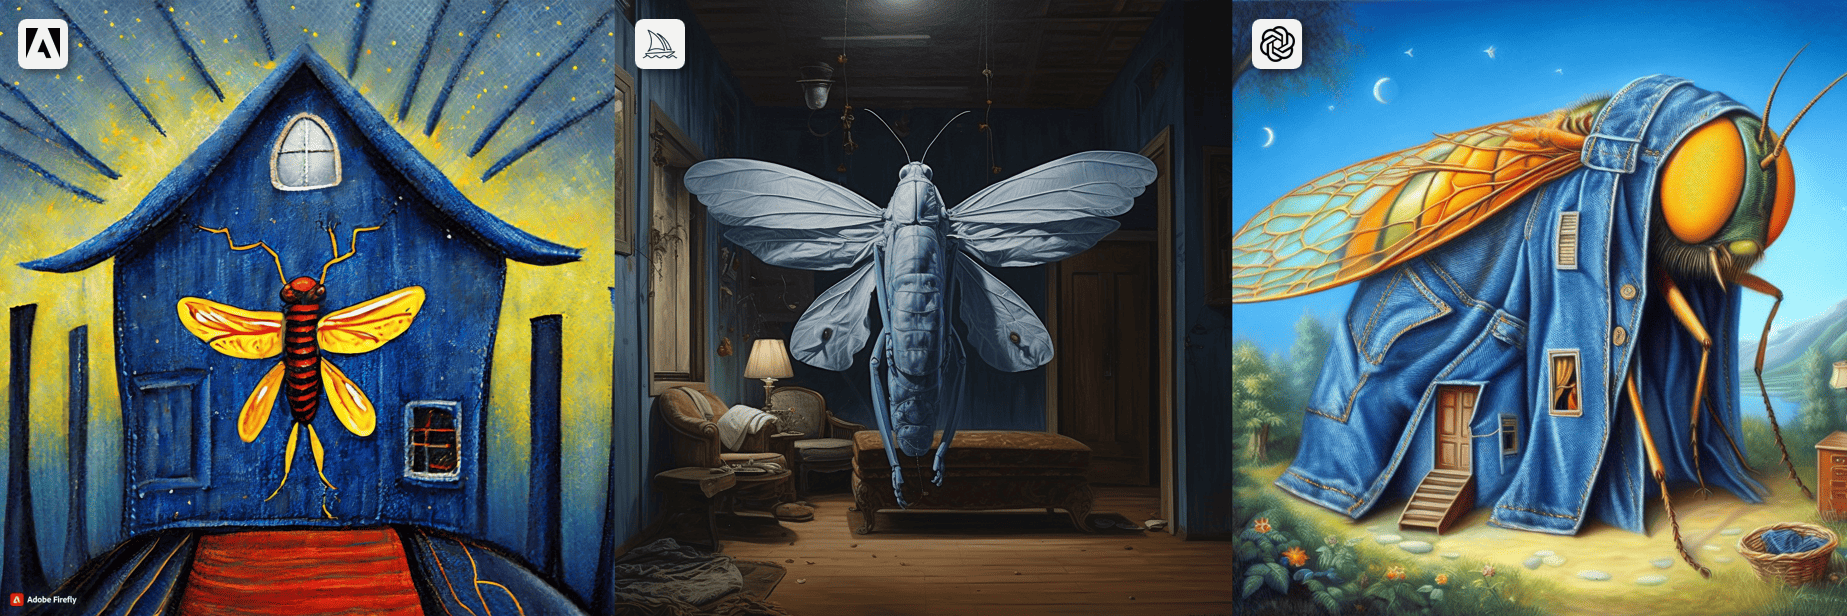 A surrealist painting of a large firefly in a house made of denim